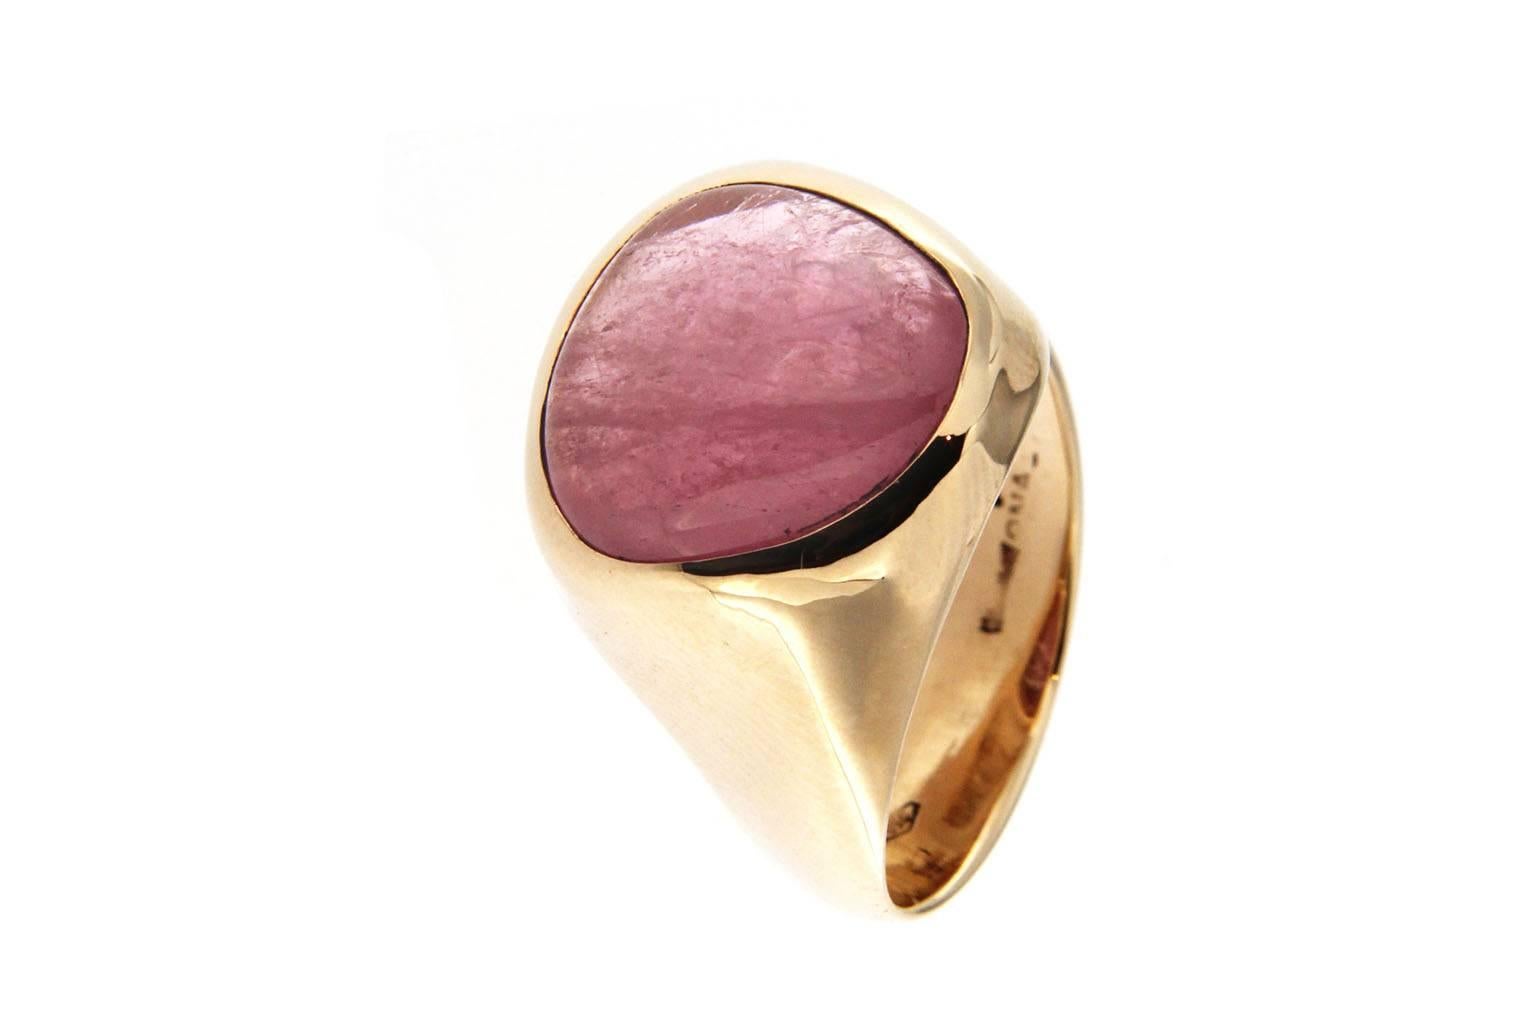 Jona design collection, hand crafted in Italy, 18 karat rose gold band ring, set with a cabochon cut intense rose Rubelite Tourmaline weighing 8.44 carats. US size 6, can be sized to any specification.
Measures: Width 0.88in-22.43mm-Depth